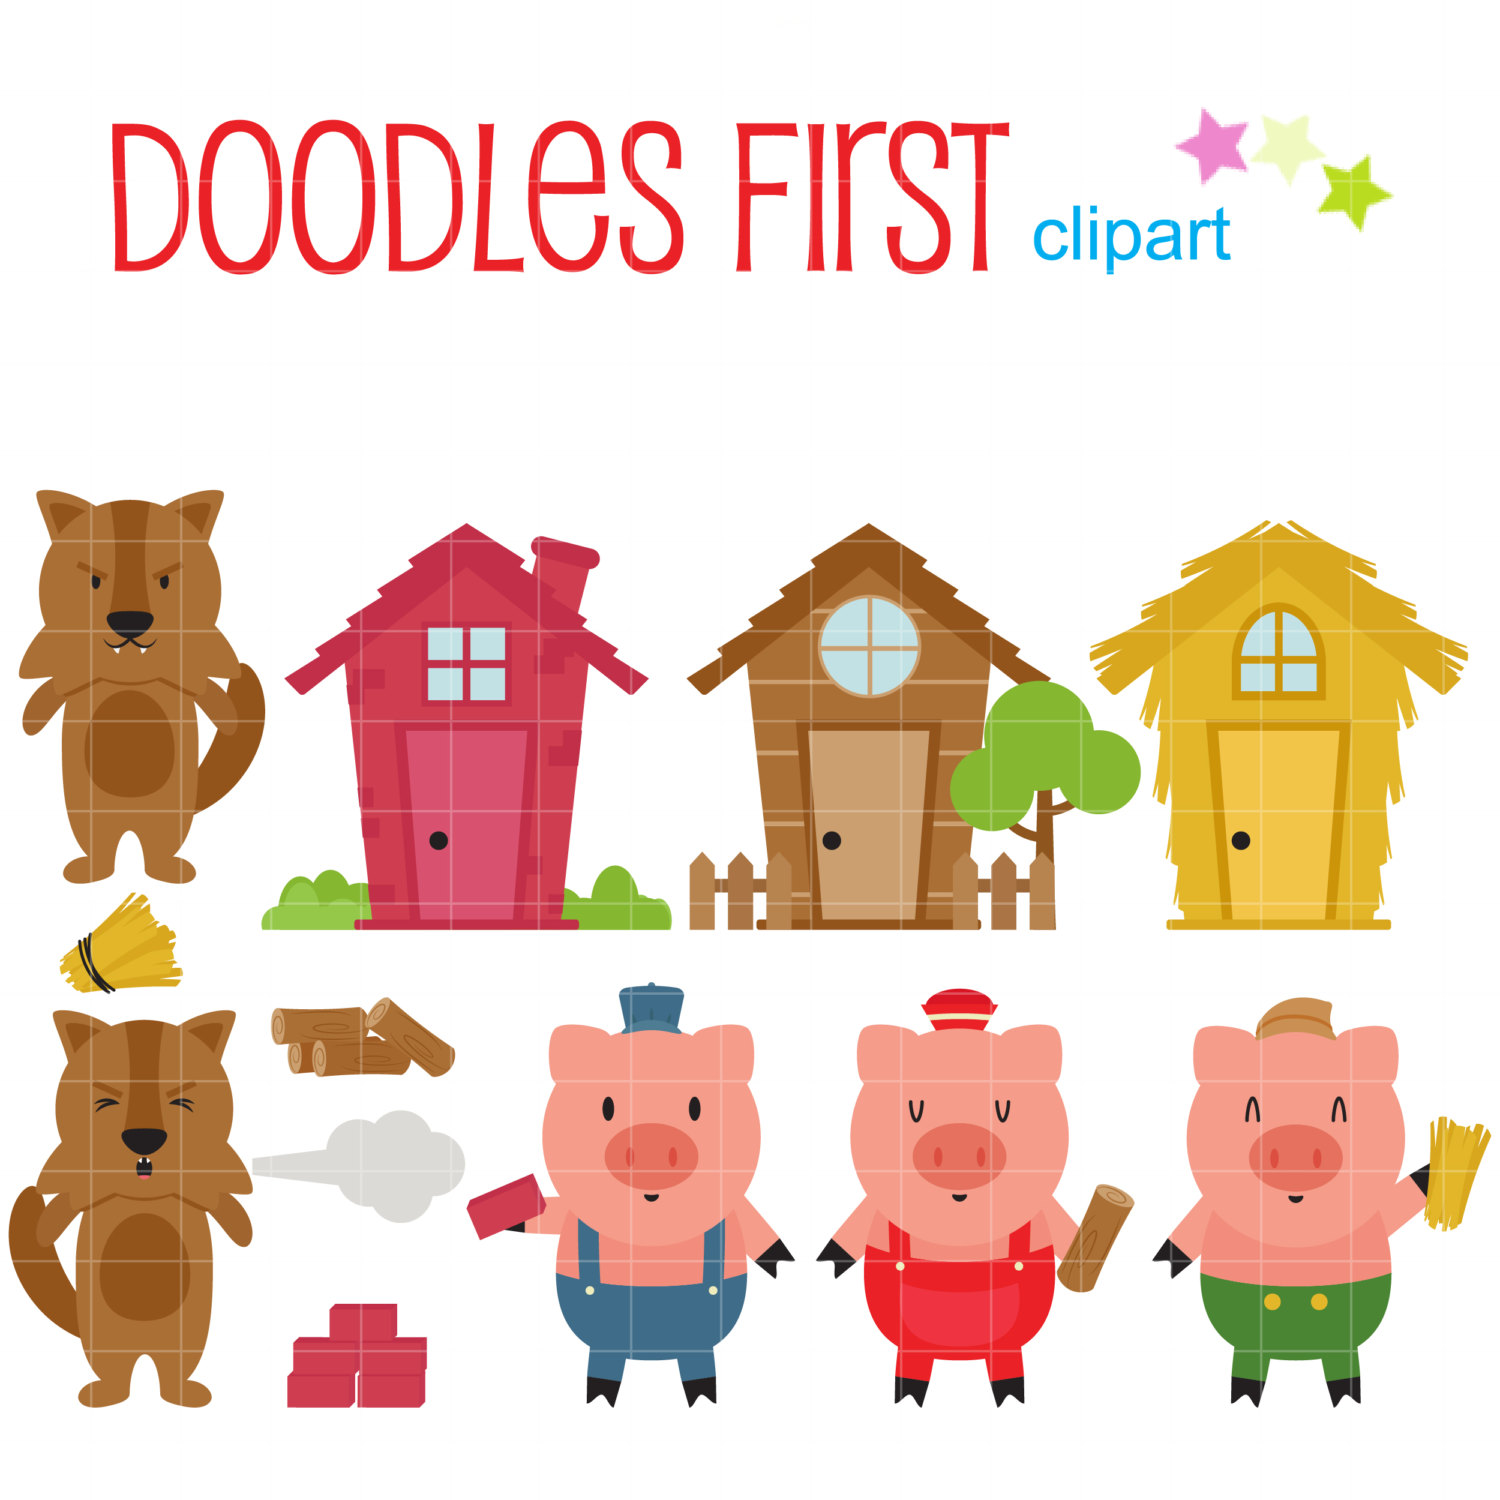 Three Little Pigs Clipart at GetDrawings Free download